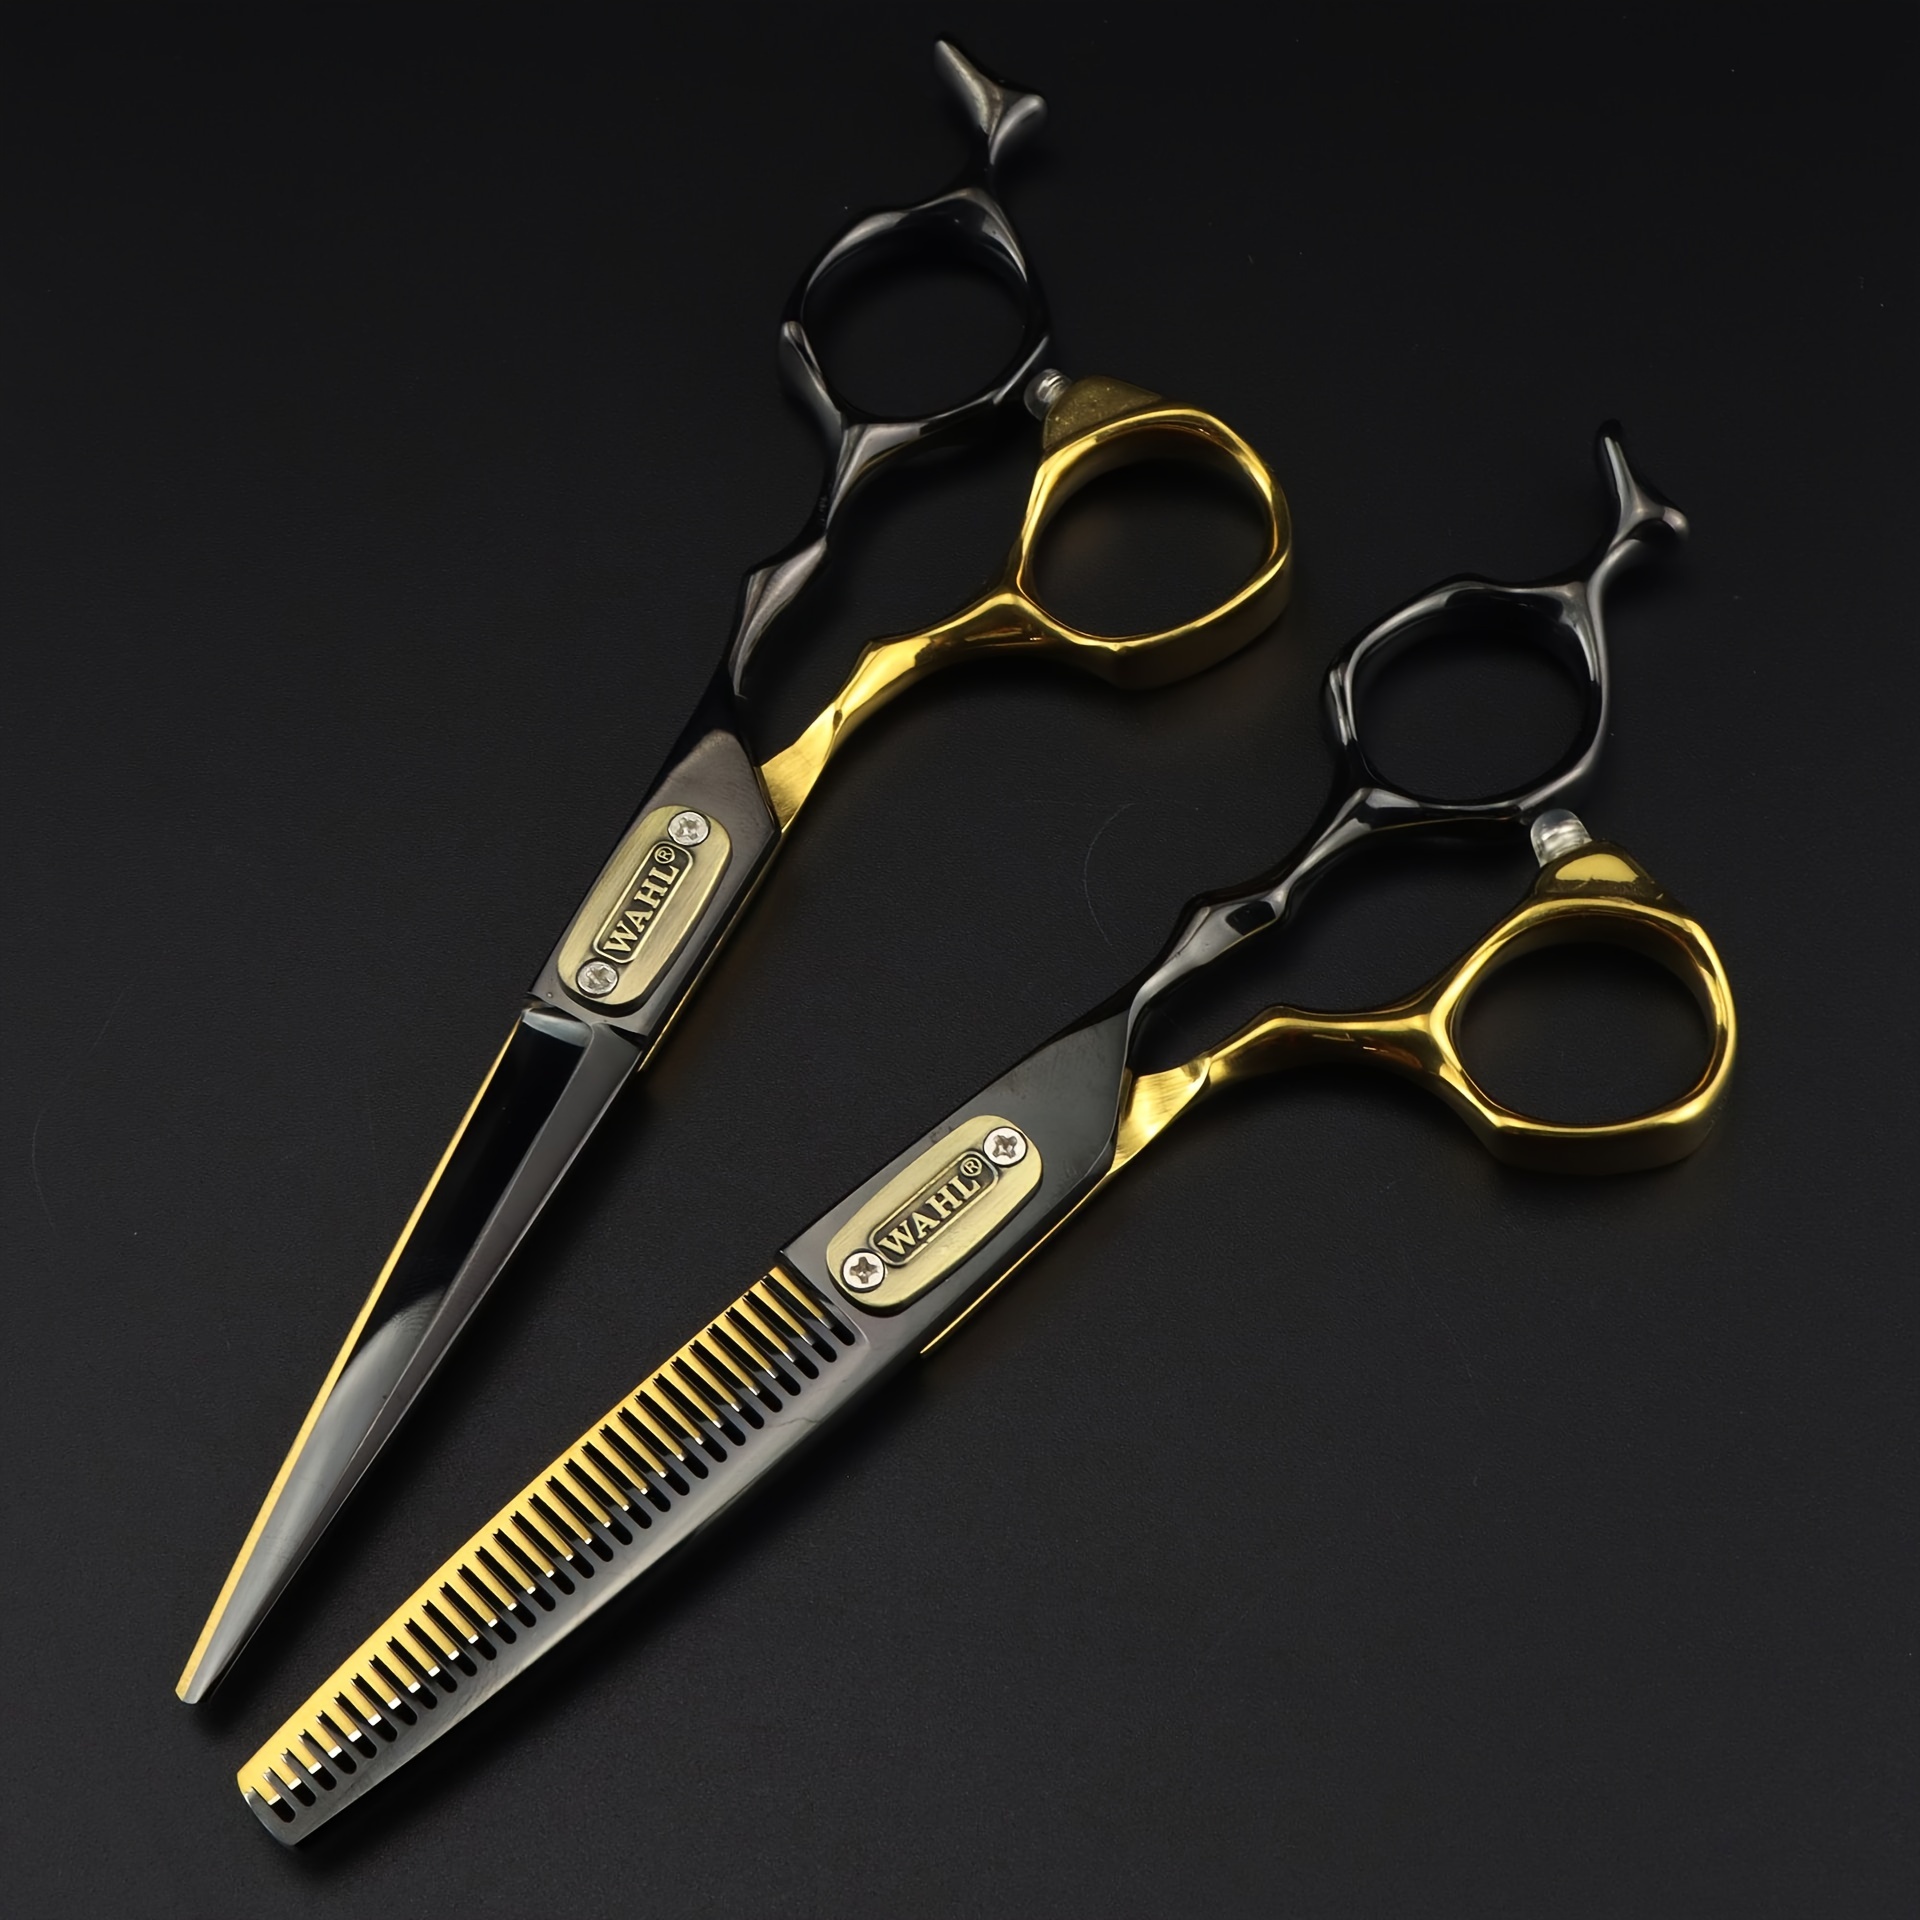 

1pc Hairdressing Scissors, 6 Inch Hair Cutting Scissors, Hair Thinning Scissors, Professional Hair Styling Tools Shears